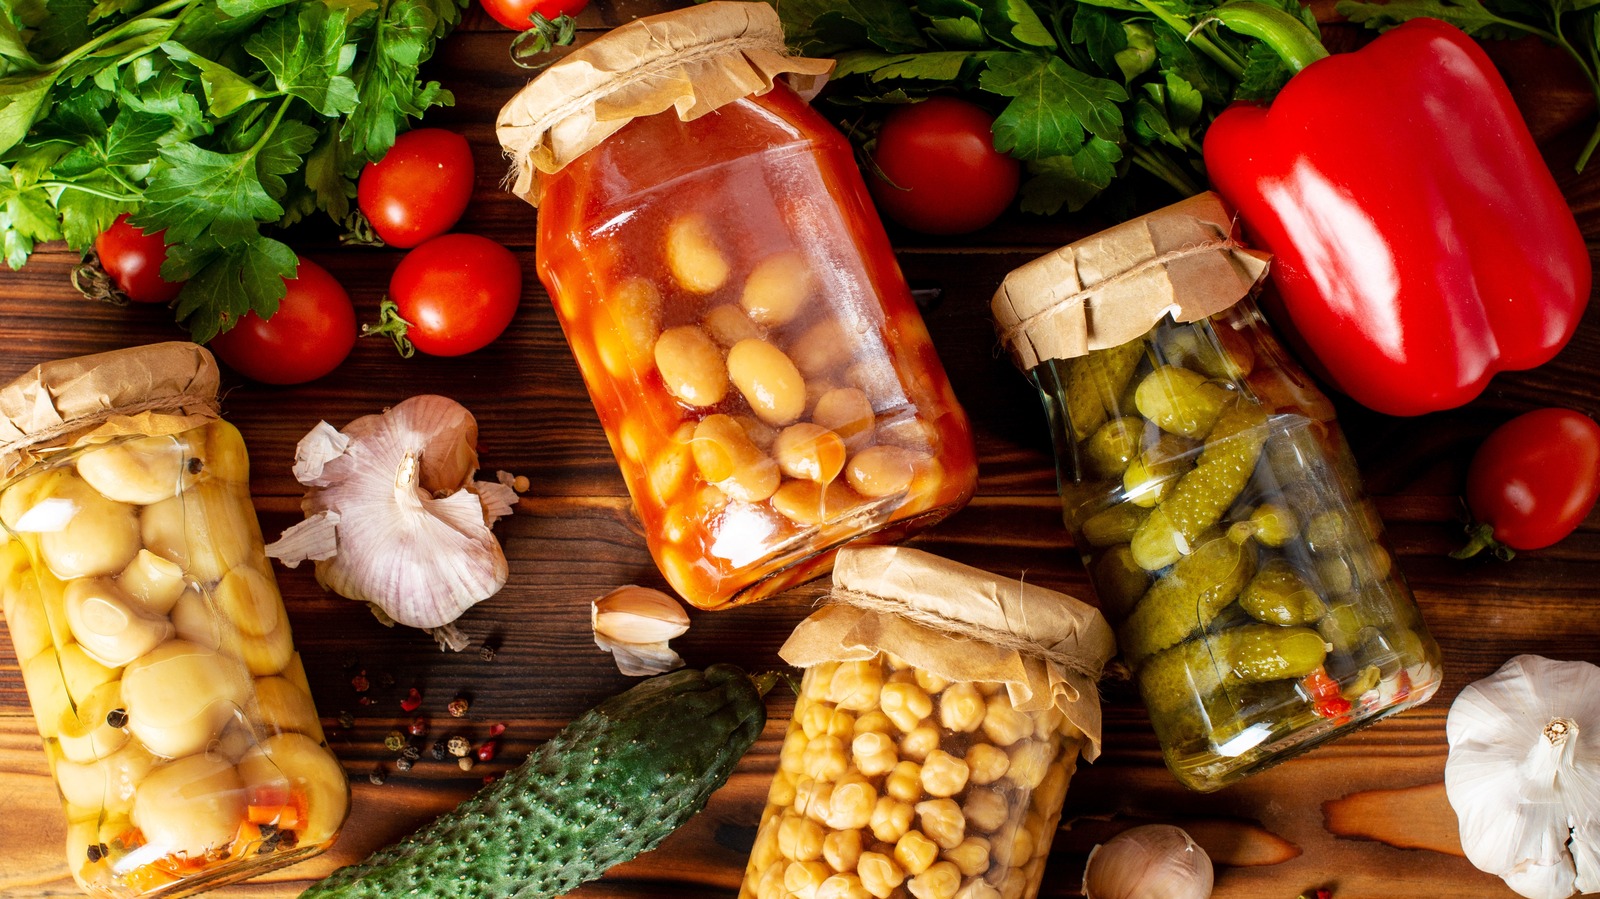 Salt substitutes in home canning - Healthy Canning in Partnership